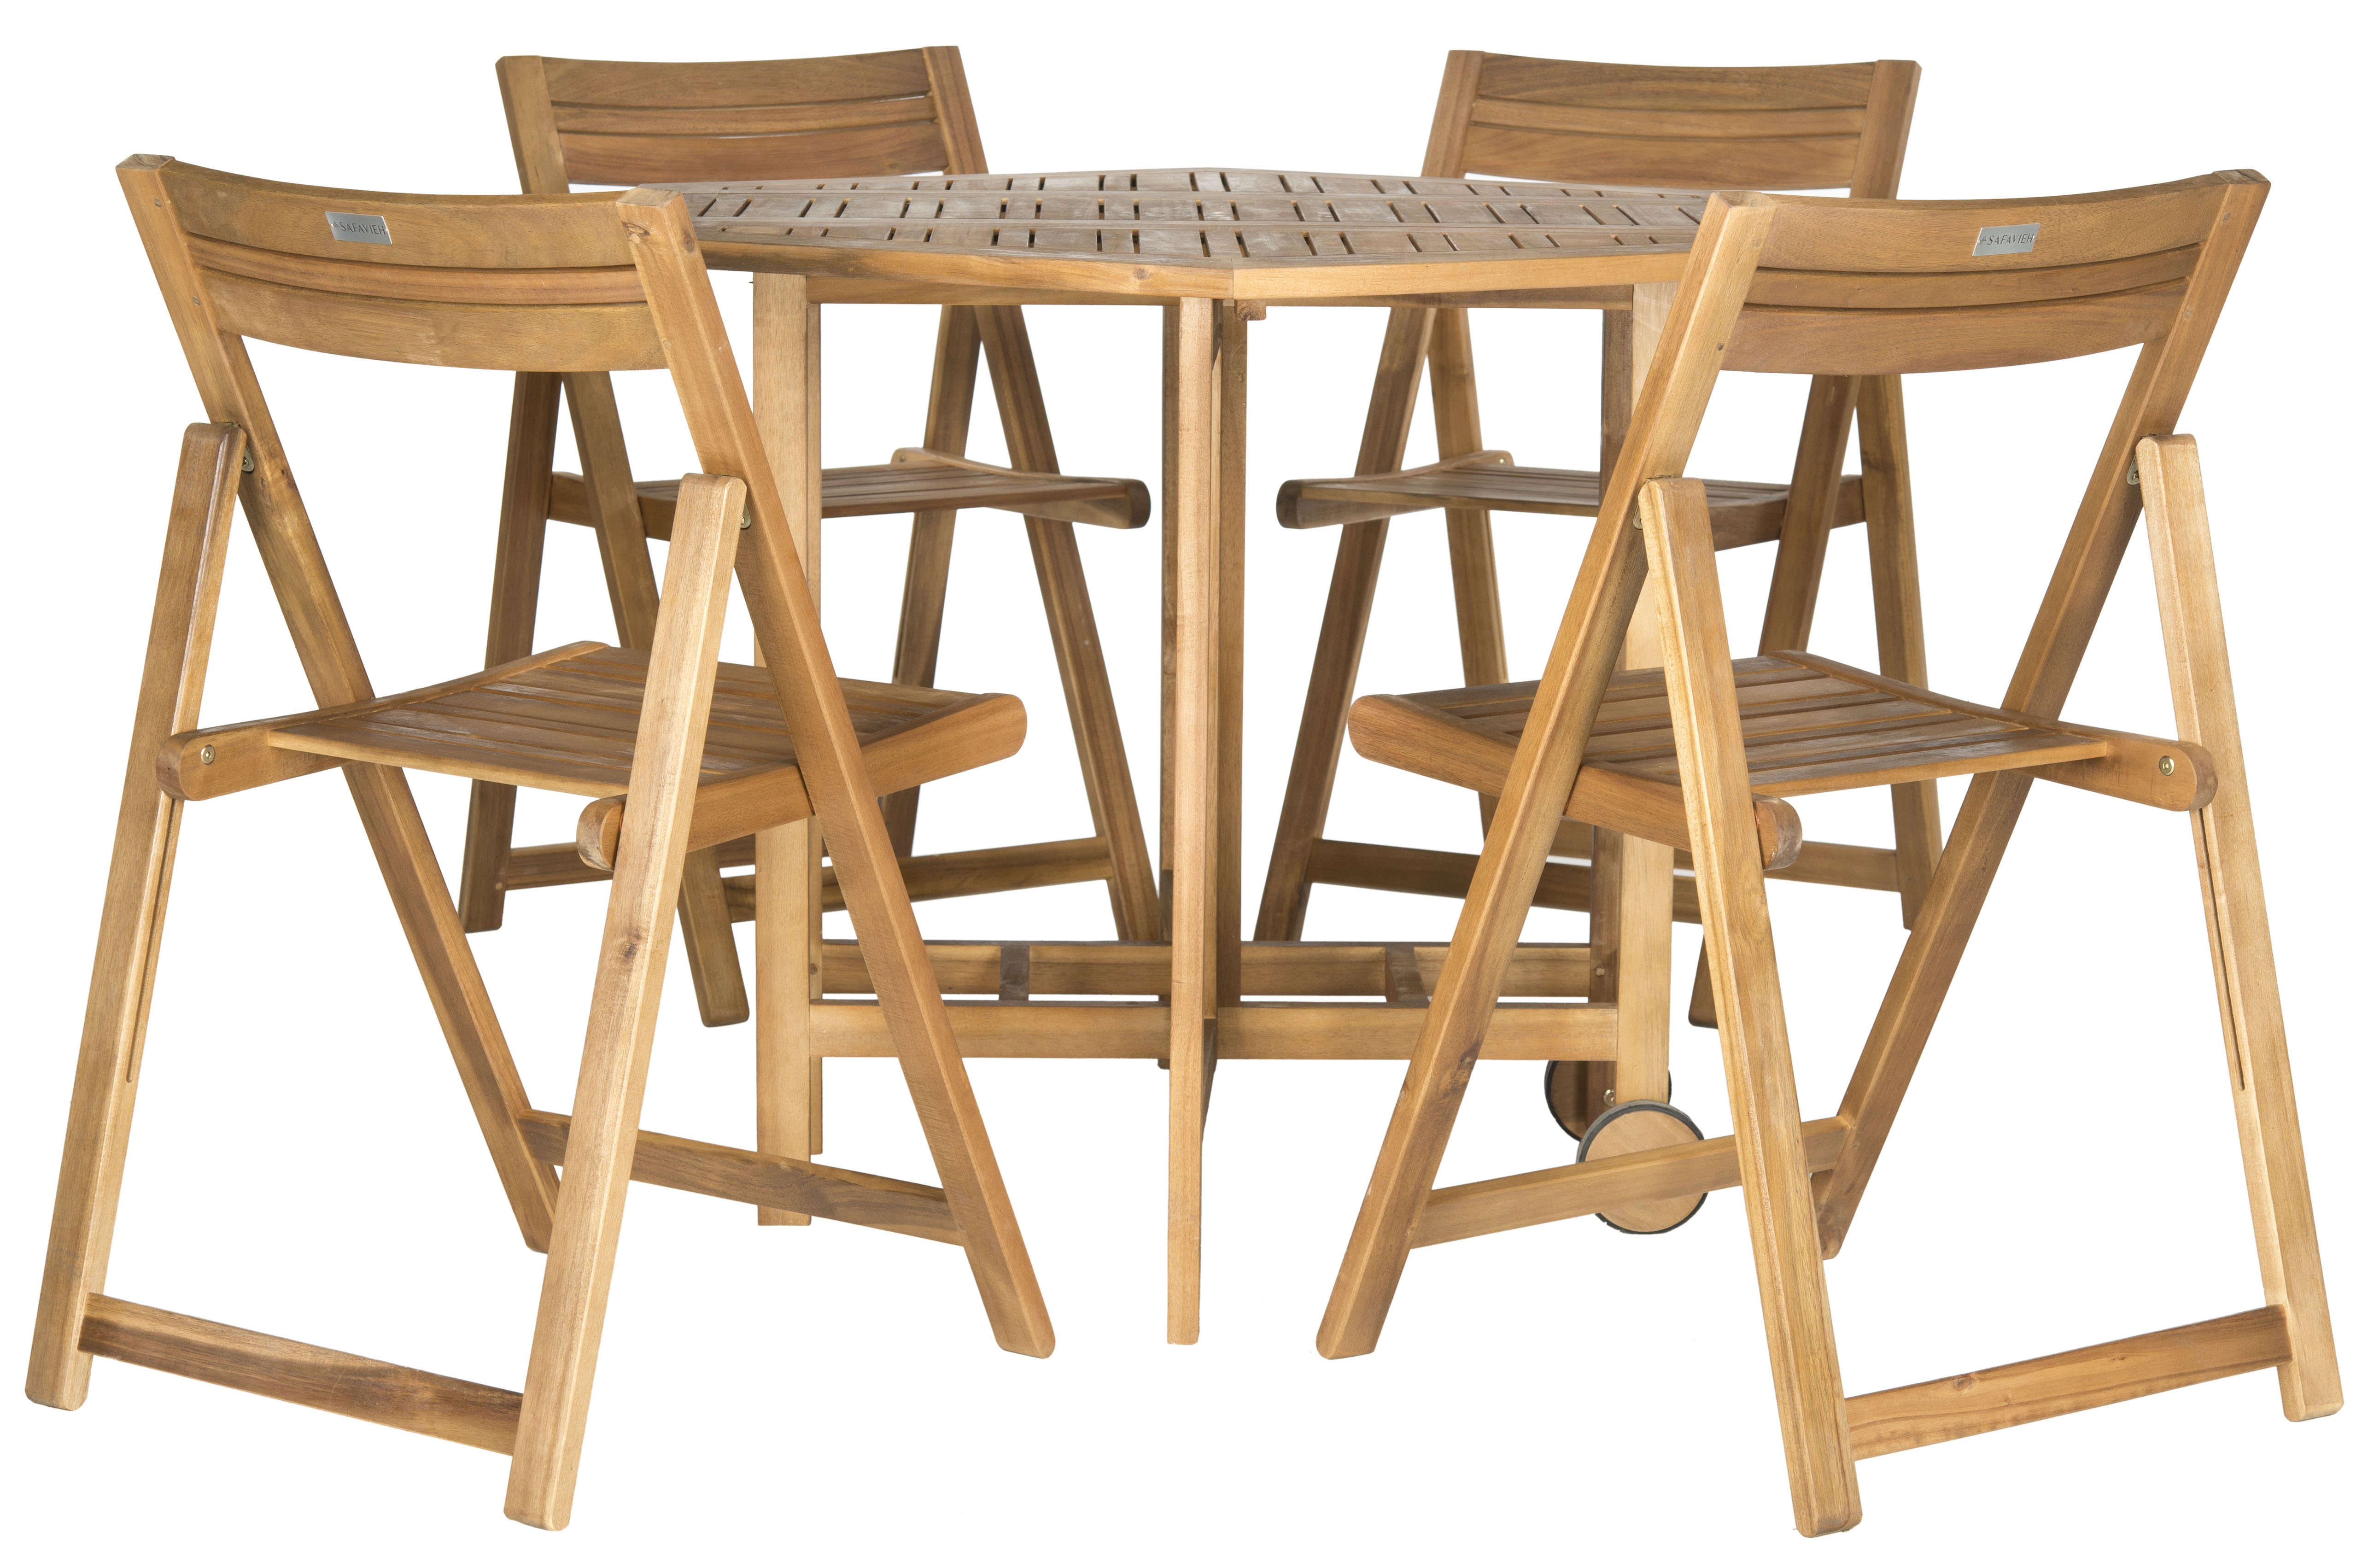 SAFAVIEH Outdoor Collection Kerman Table & 4 Chairs Natural - image 3 of 7